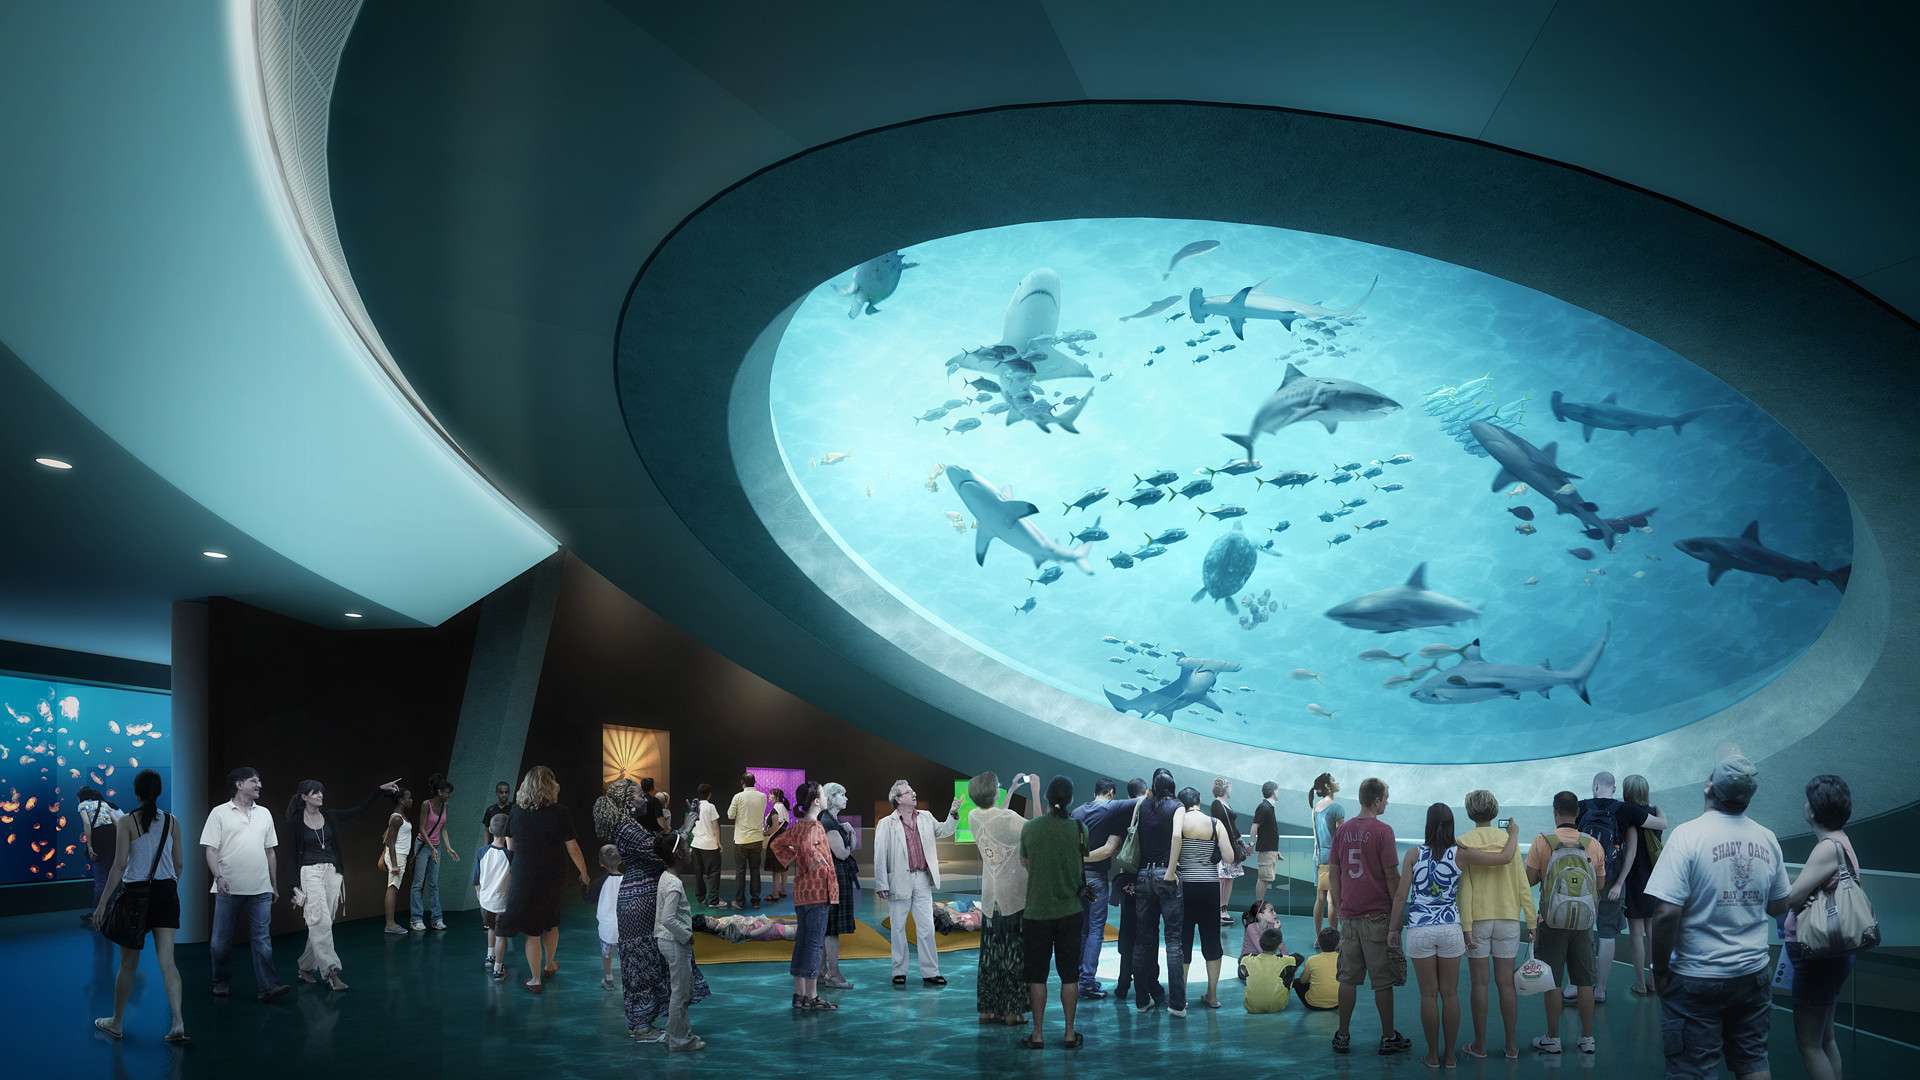 Take a video tour of the new Frost Museum of Science